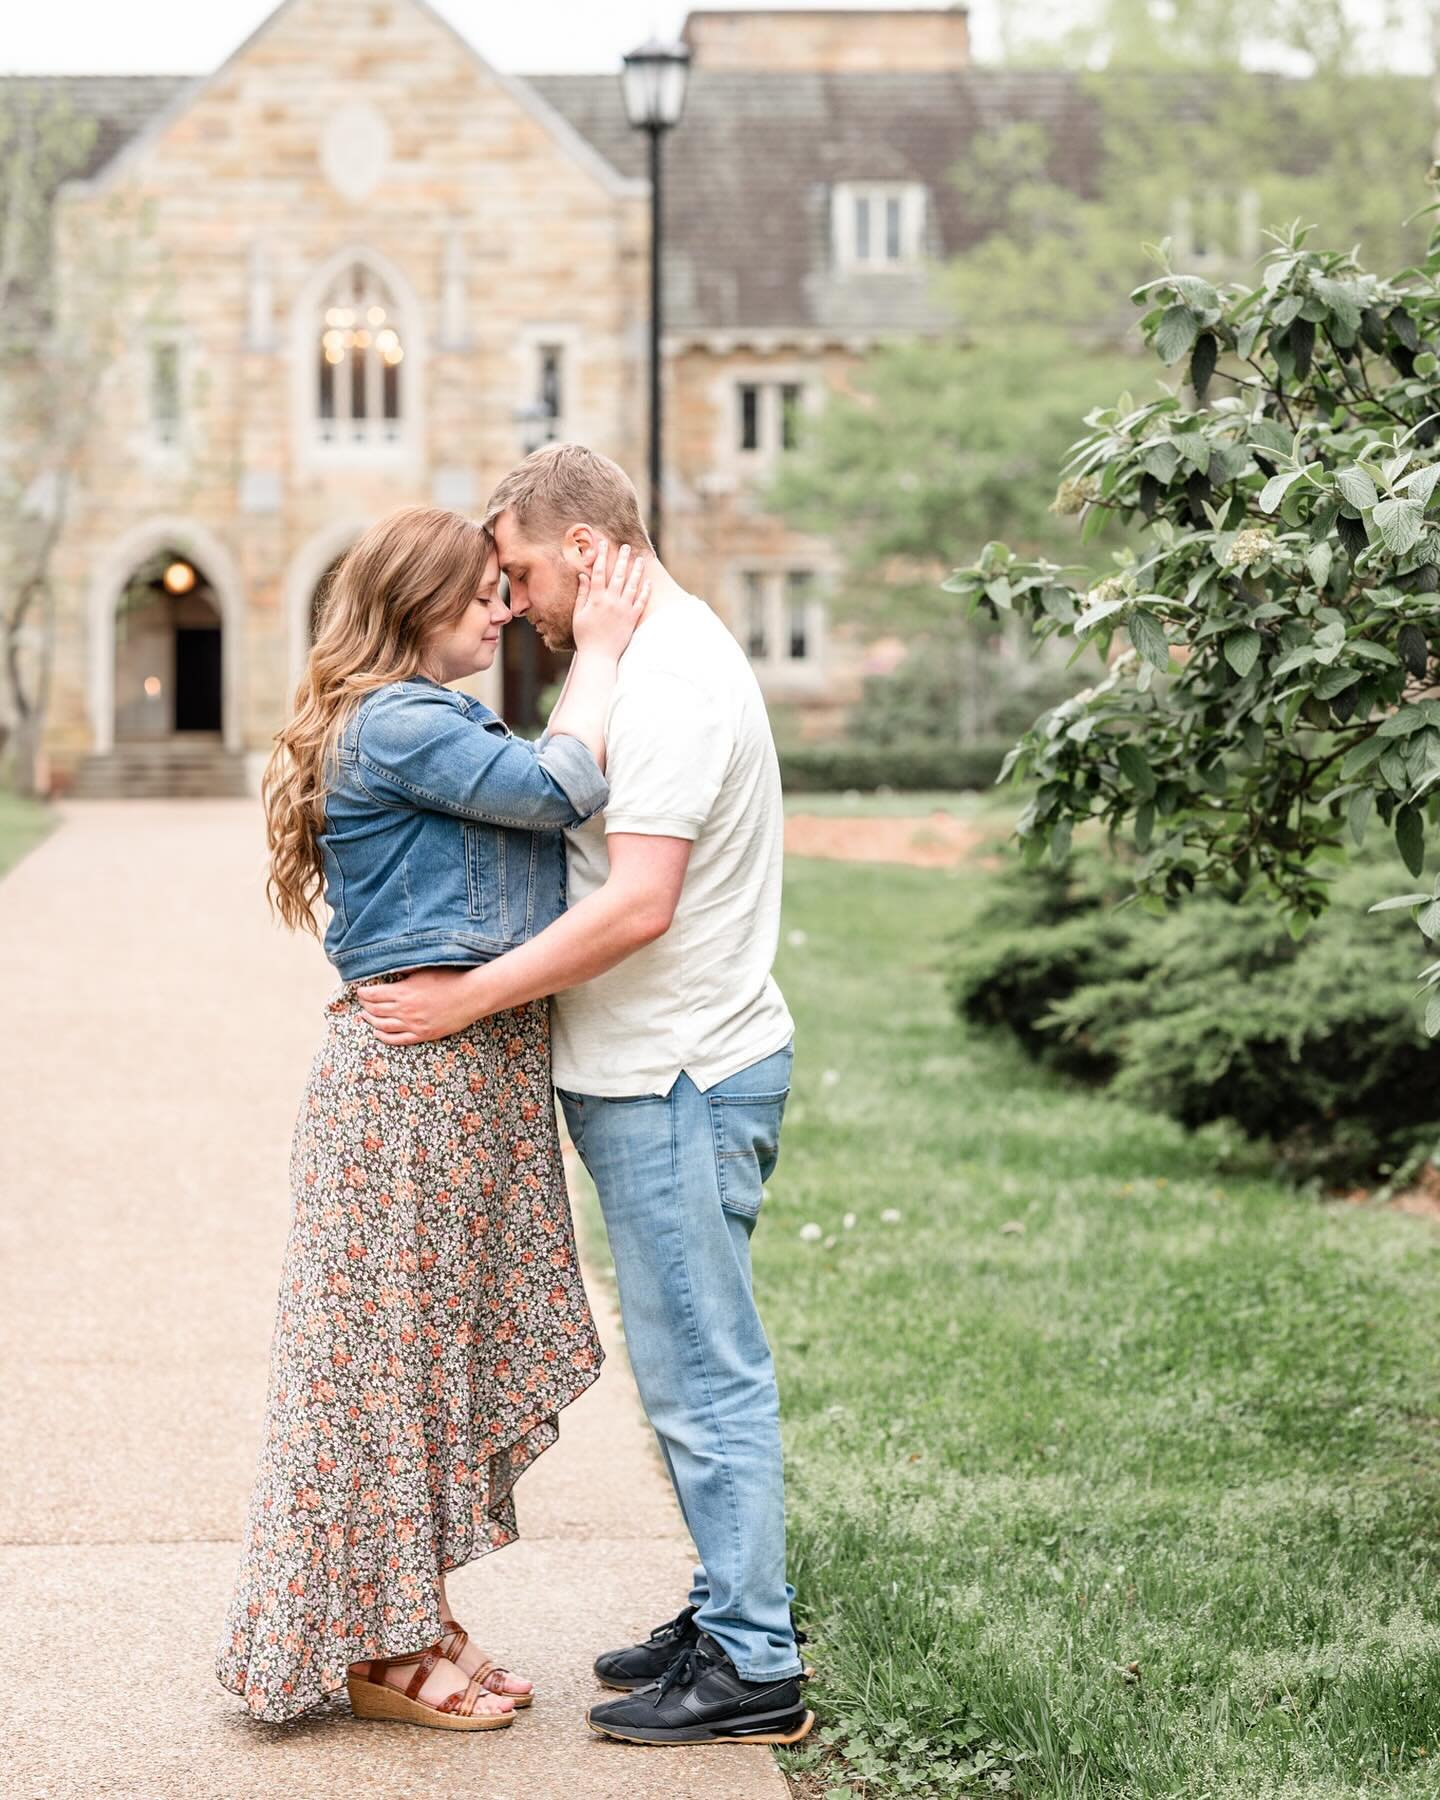 |Sneak Peeks: Kellie + Ben| On Saturday, I got to travel to Sewanee: University of the South to meet up with Kellie and Ben. It had been many, many years since I last stopped in Sewanee and I do not remember it being as beautiful as it is. My sweet m